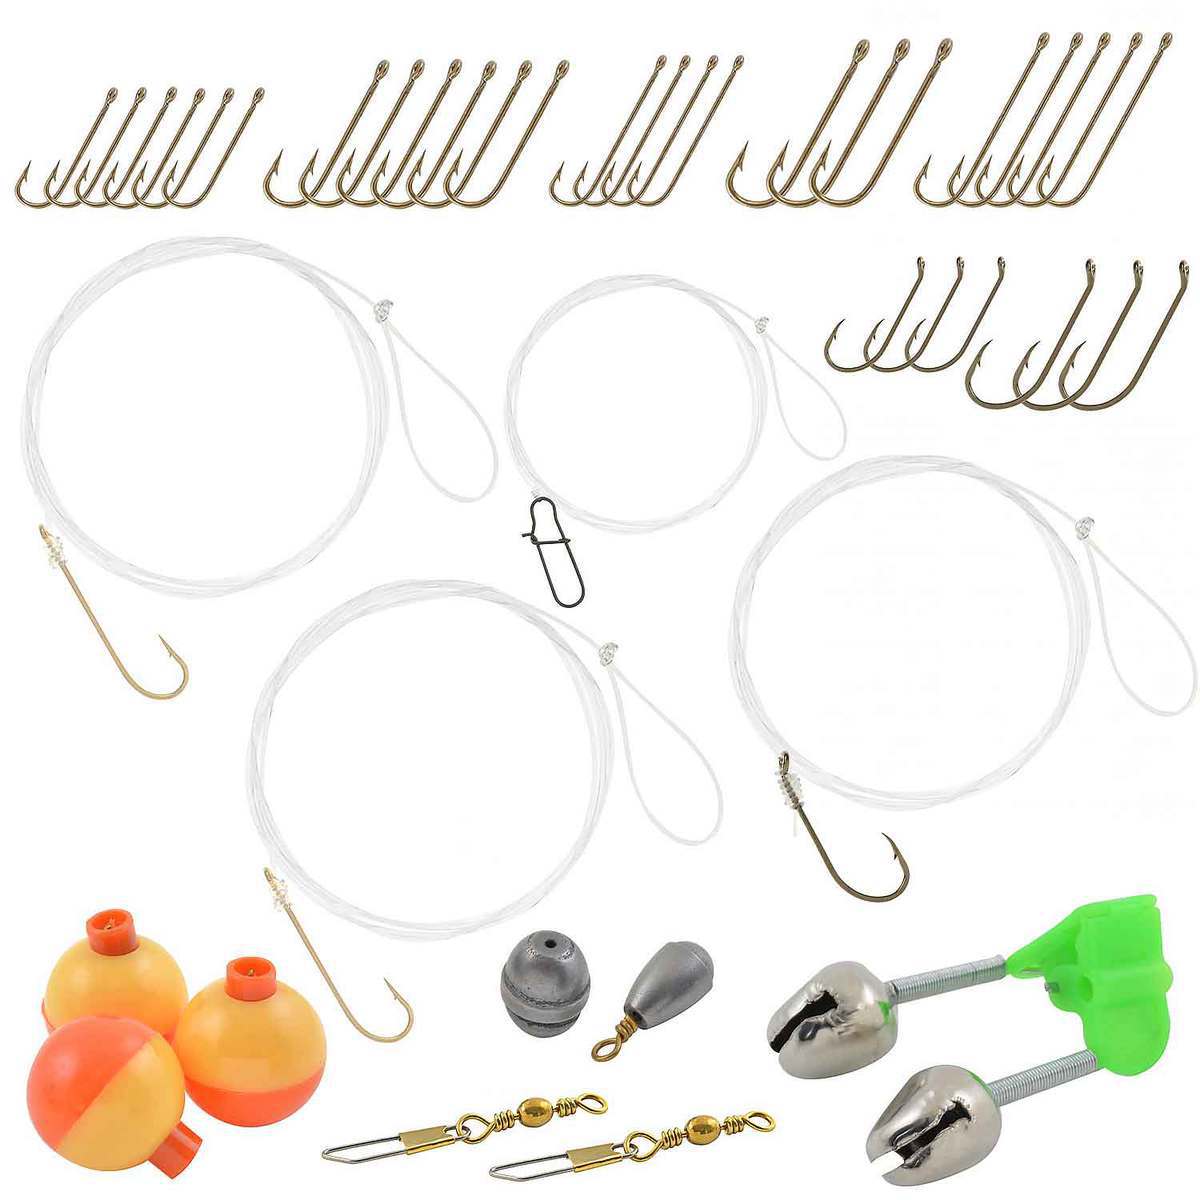 South Bend Ready2Fish All-Species w/Tackle Kit Spincast Combo - 5ft 6in ...